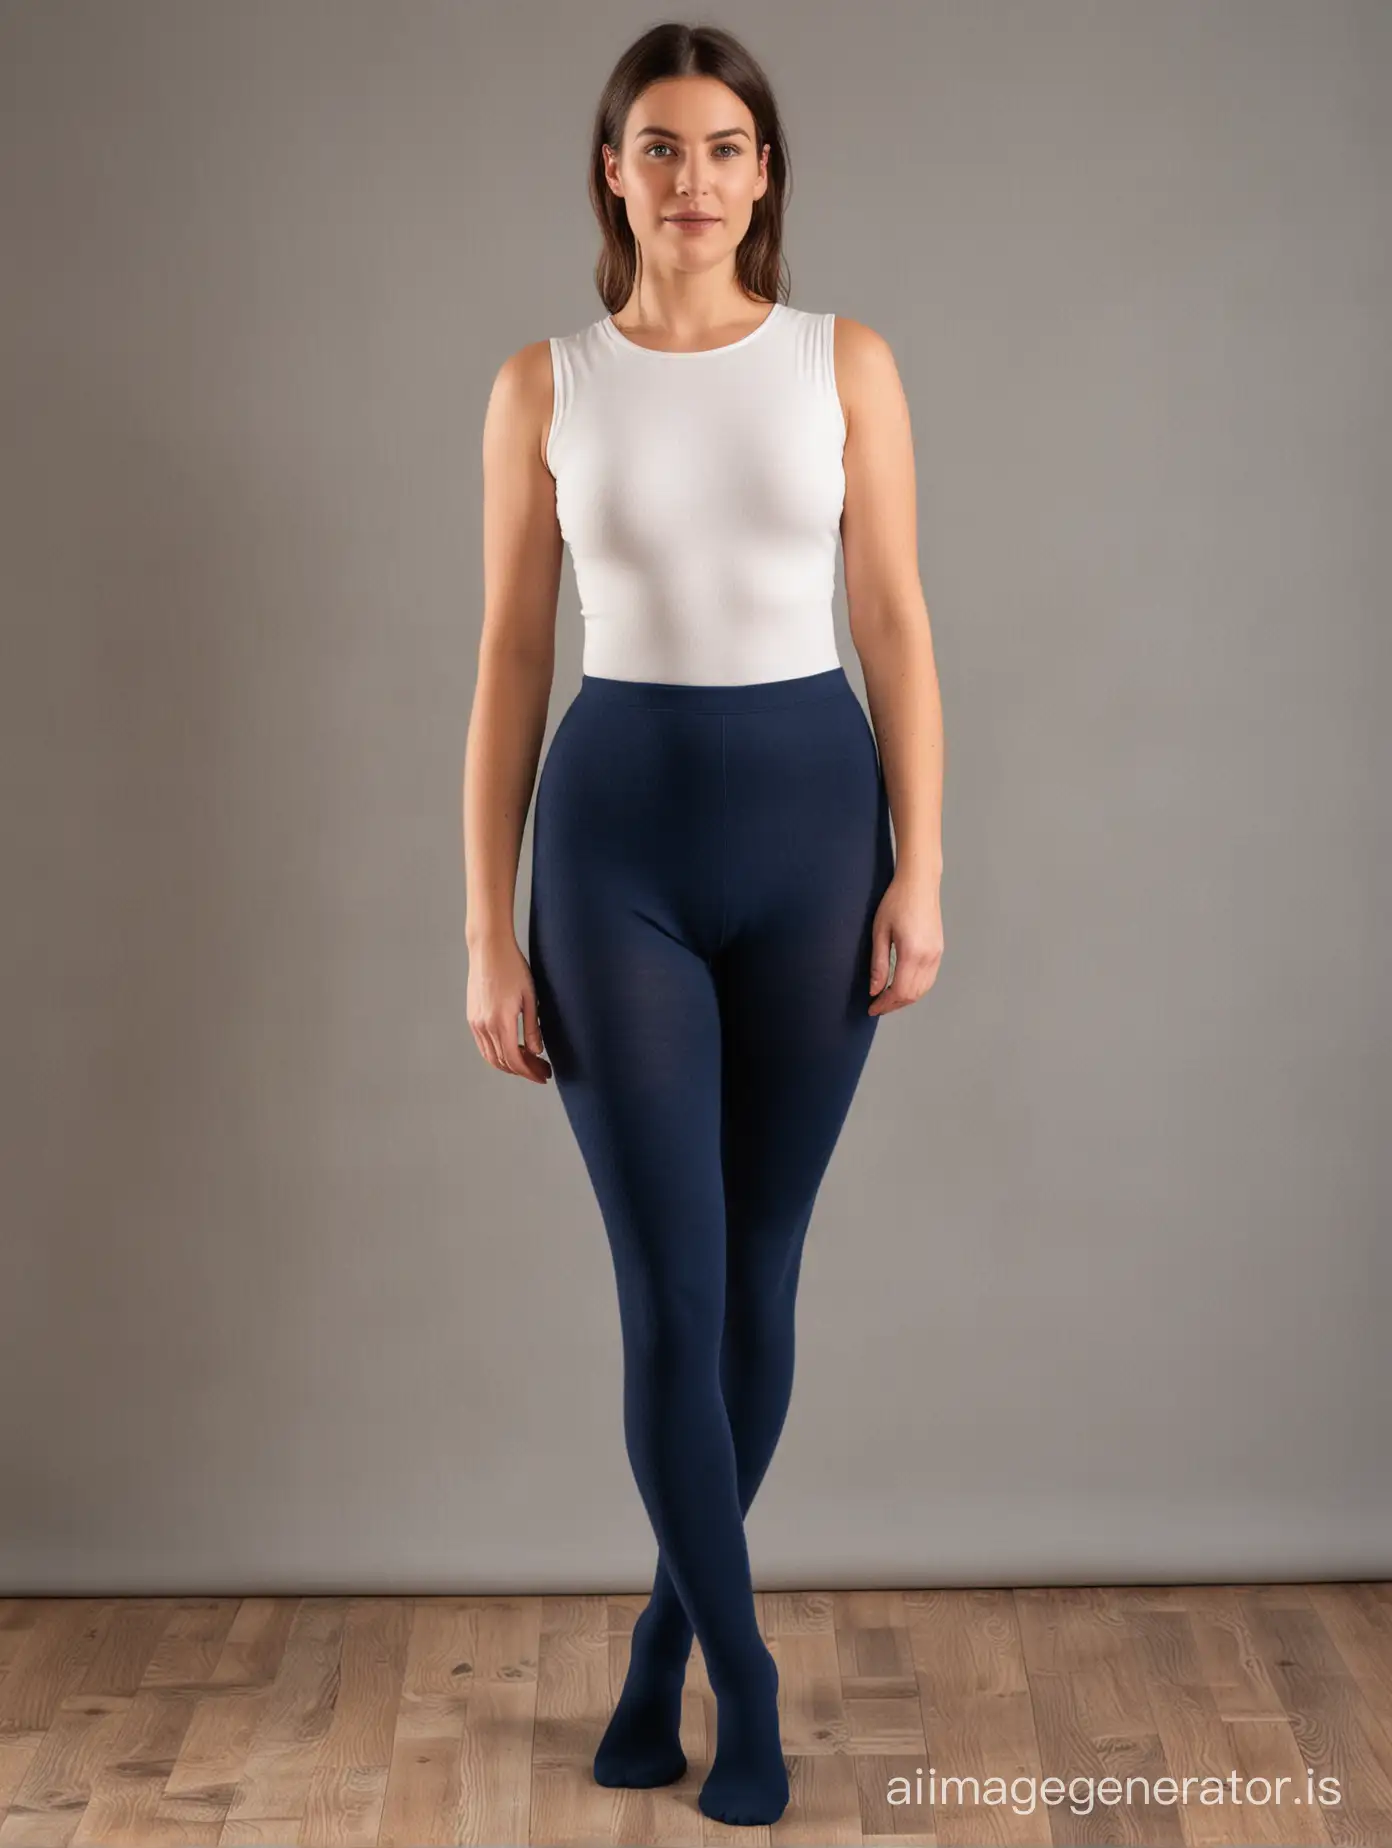 woman full body "extra thick blue wool tights"